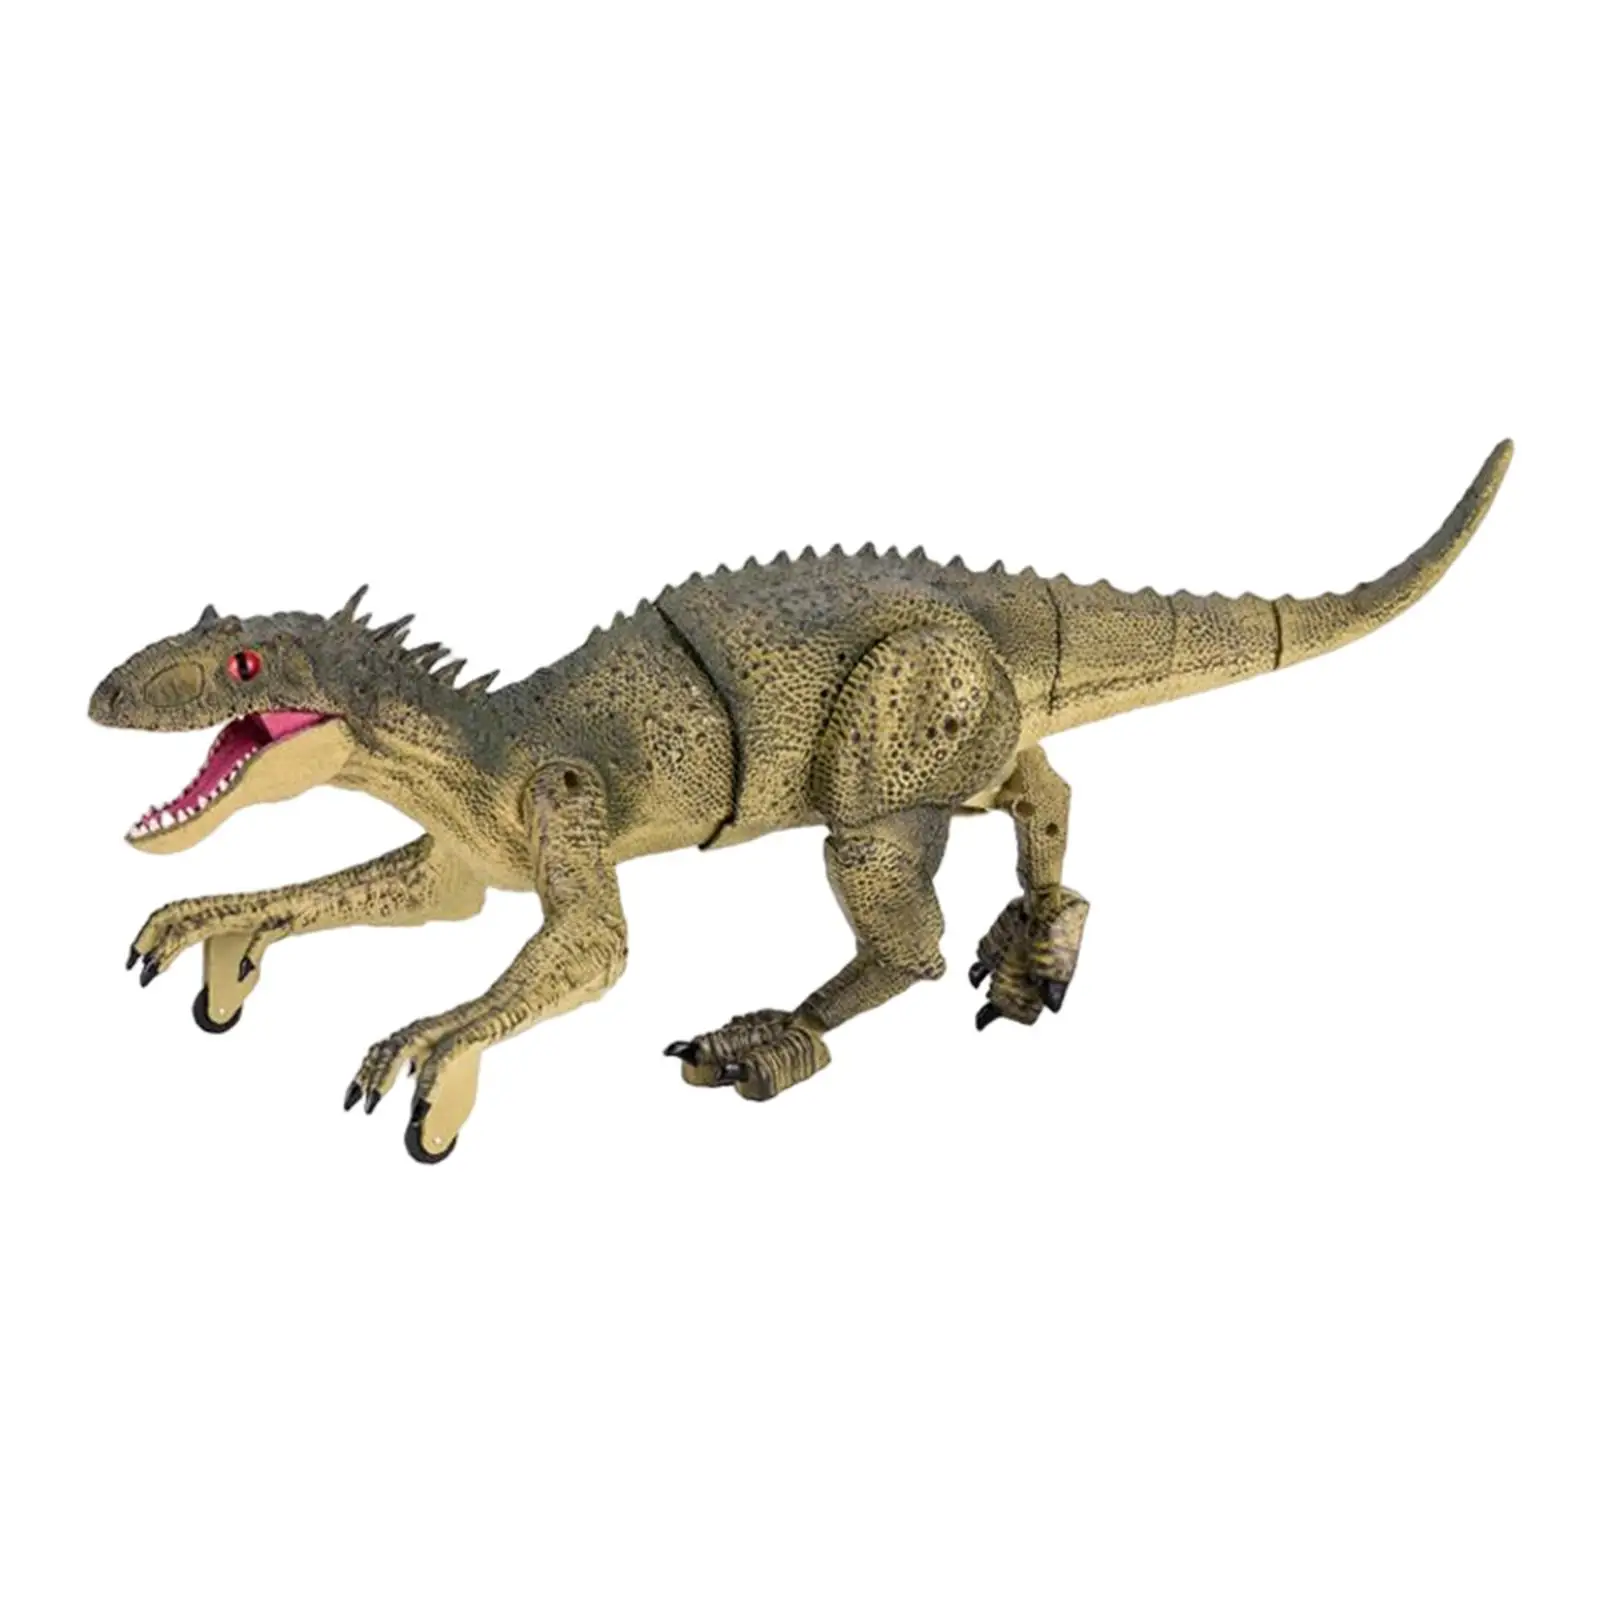 2.4G Dinosaur Toy Realistic with Light Walking Dinosaur Electric Toy RC with Sound Multifunction for Children Girls Boys Gifts